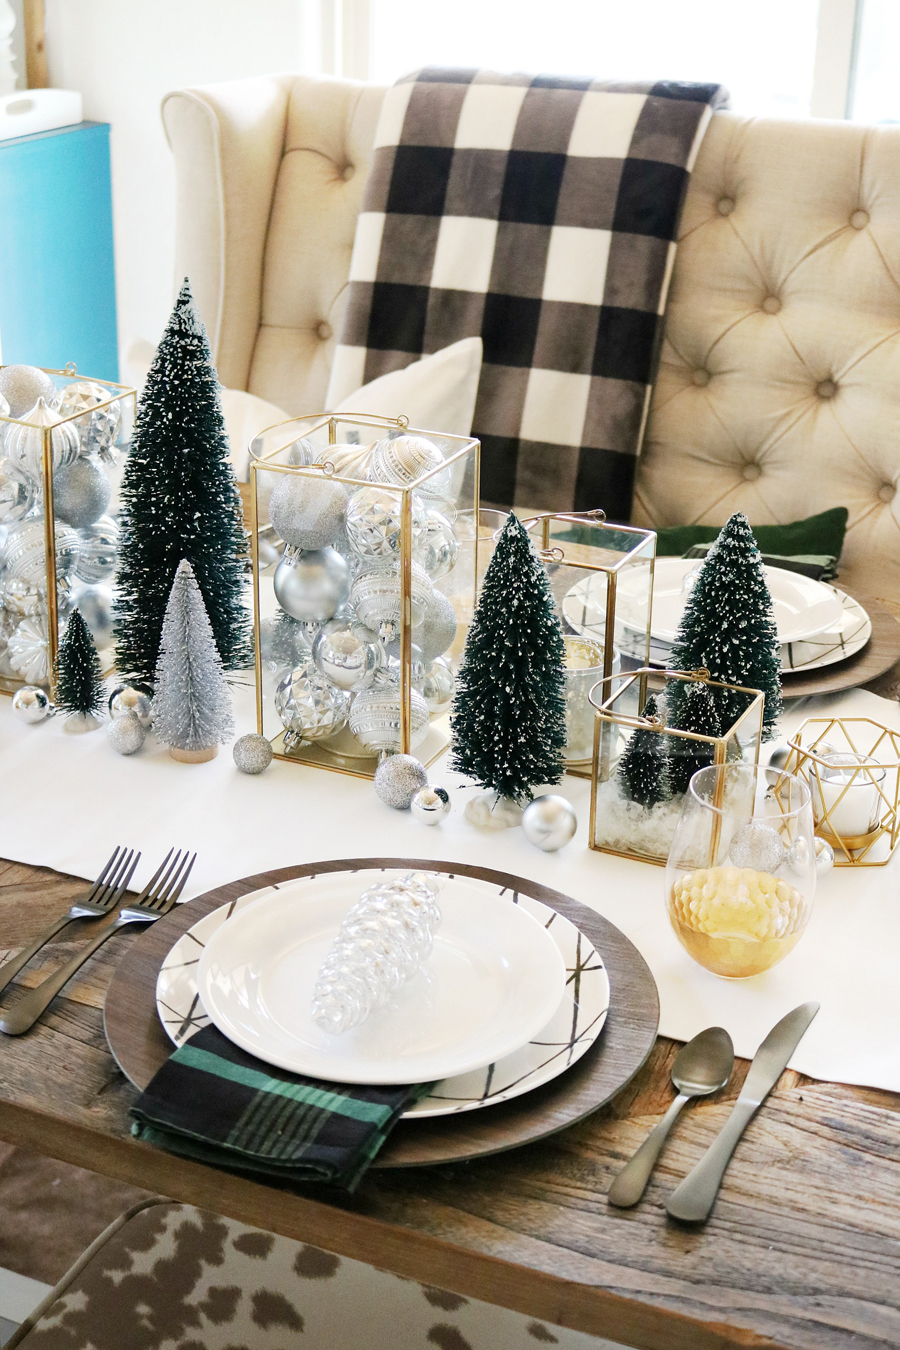 https://www.thecraftedsparrow.com/wp-content/uploads/2017/11/Simple-and-Modern-Christmas-Dining-Table-Ideas-6.jpg